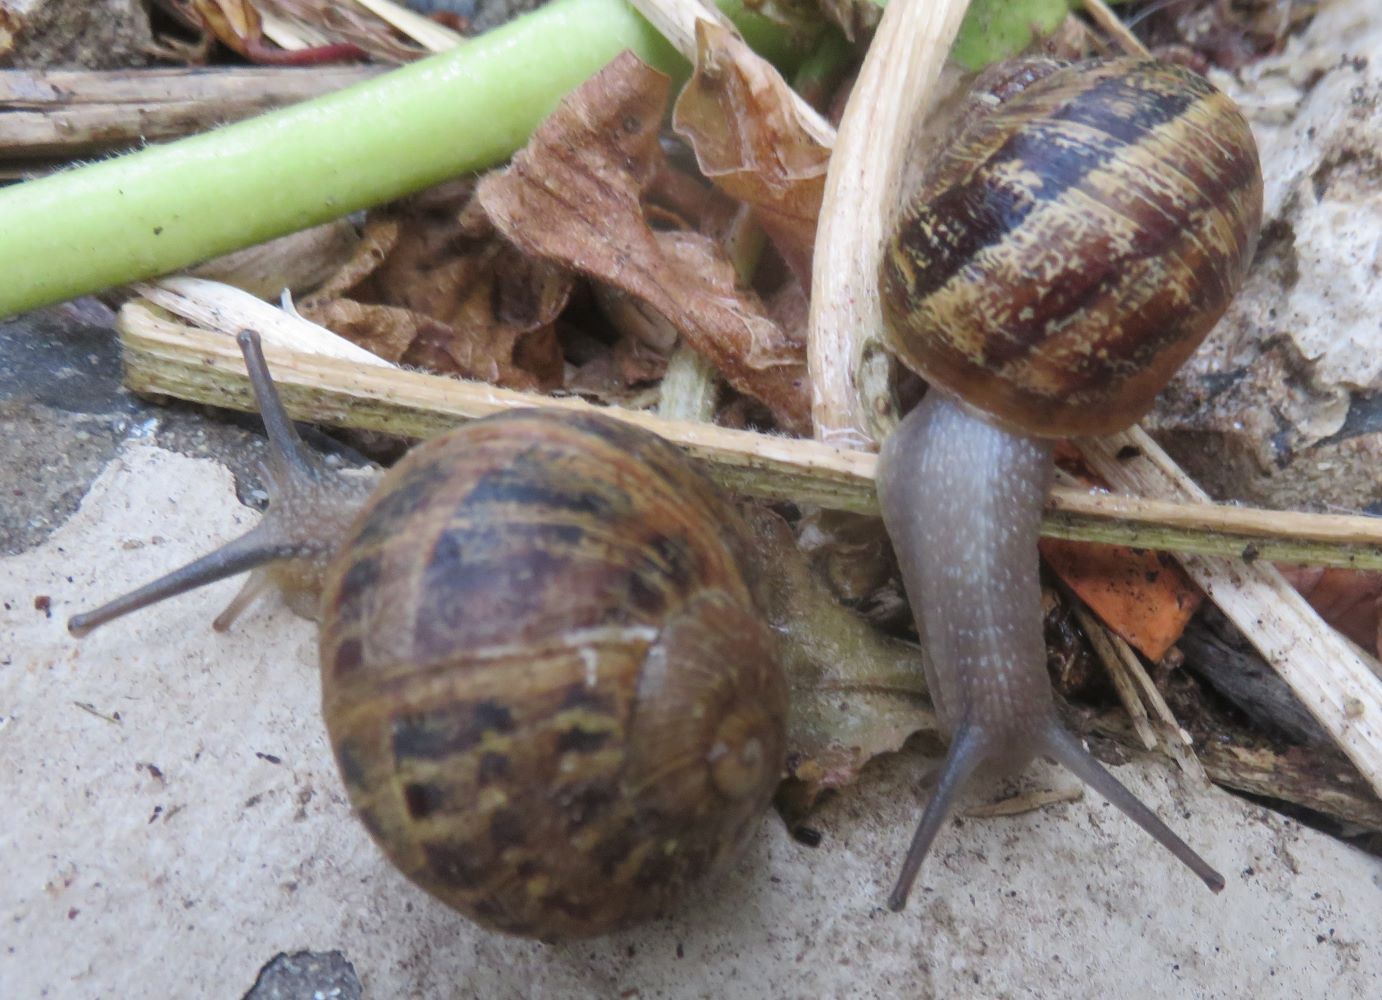 For a snail, every meeting has so much potential ! Read the next article on snail biology and sex.